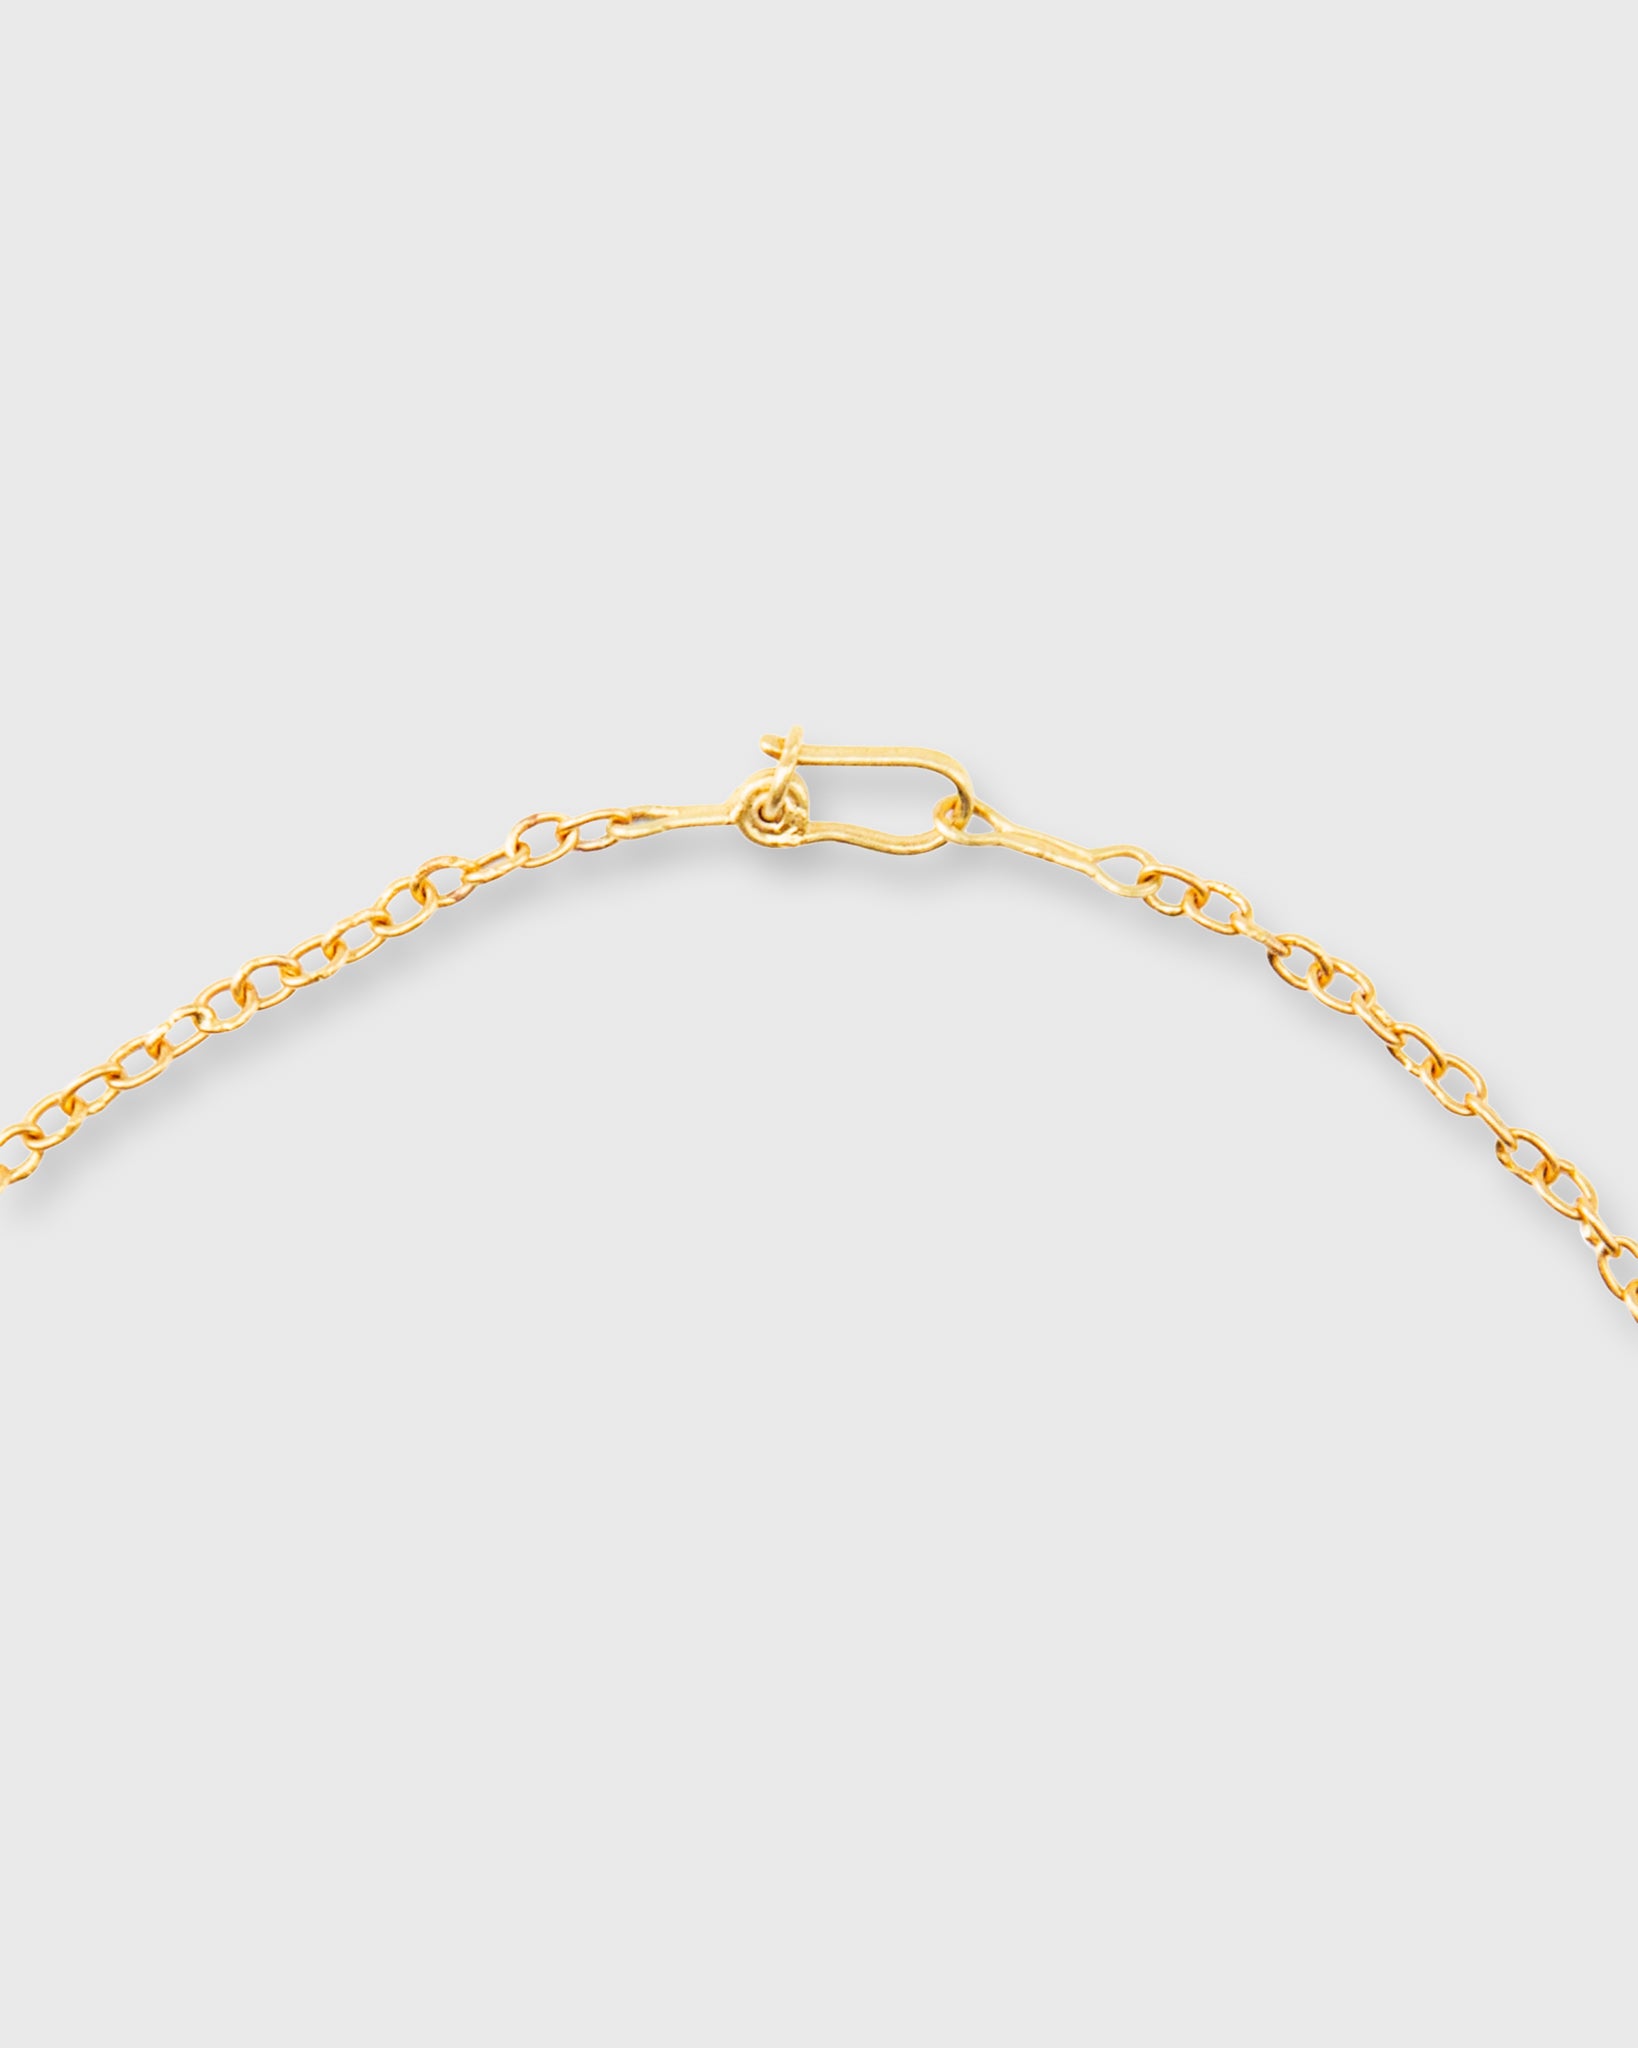 Handmade Necklace Chain 22K Gold